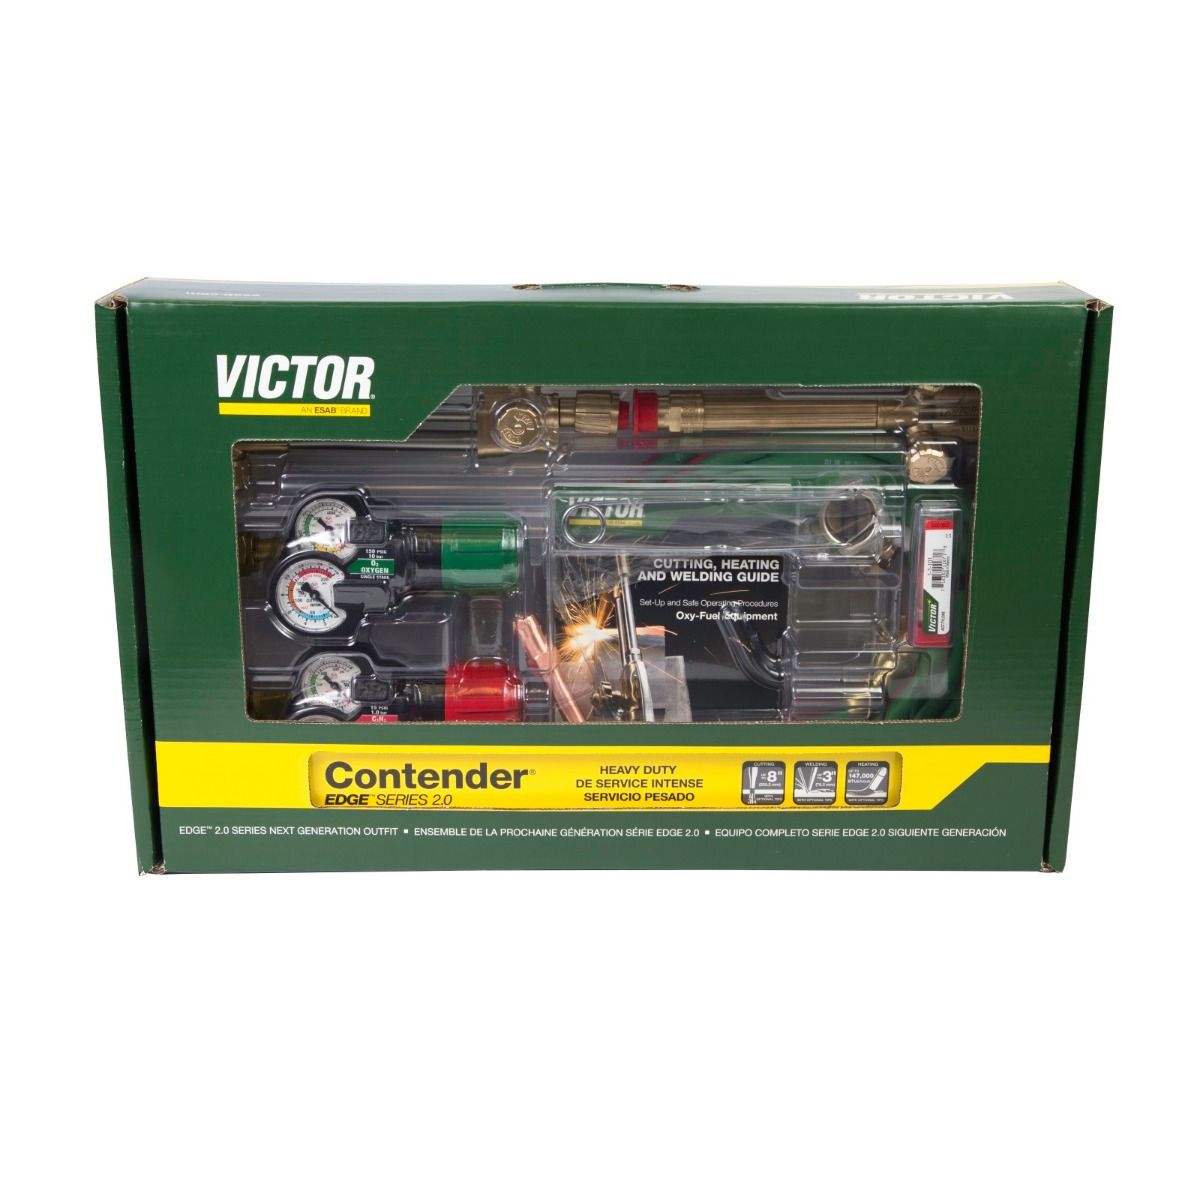 Victor Contender 540/510 Edge 2.0 Heavy Duty Outfit (Propane) - 0384-2132